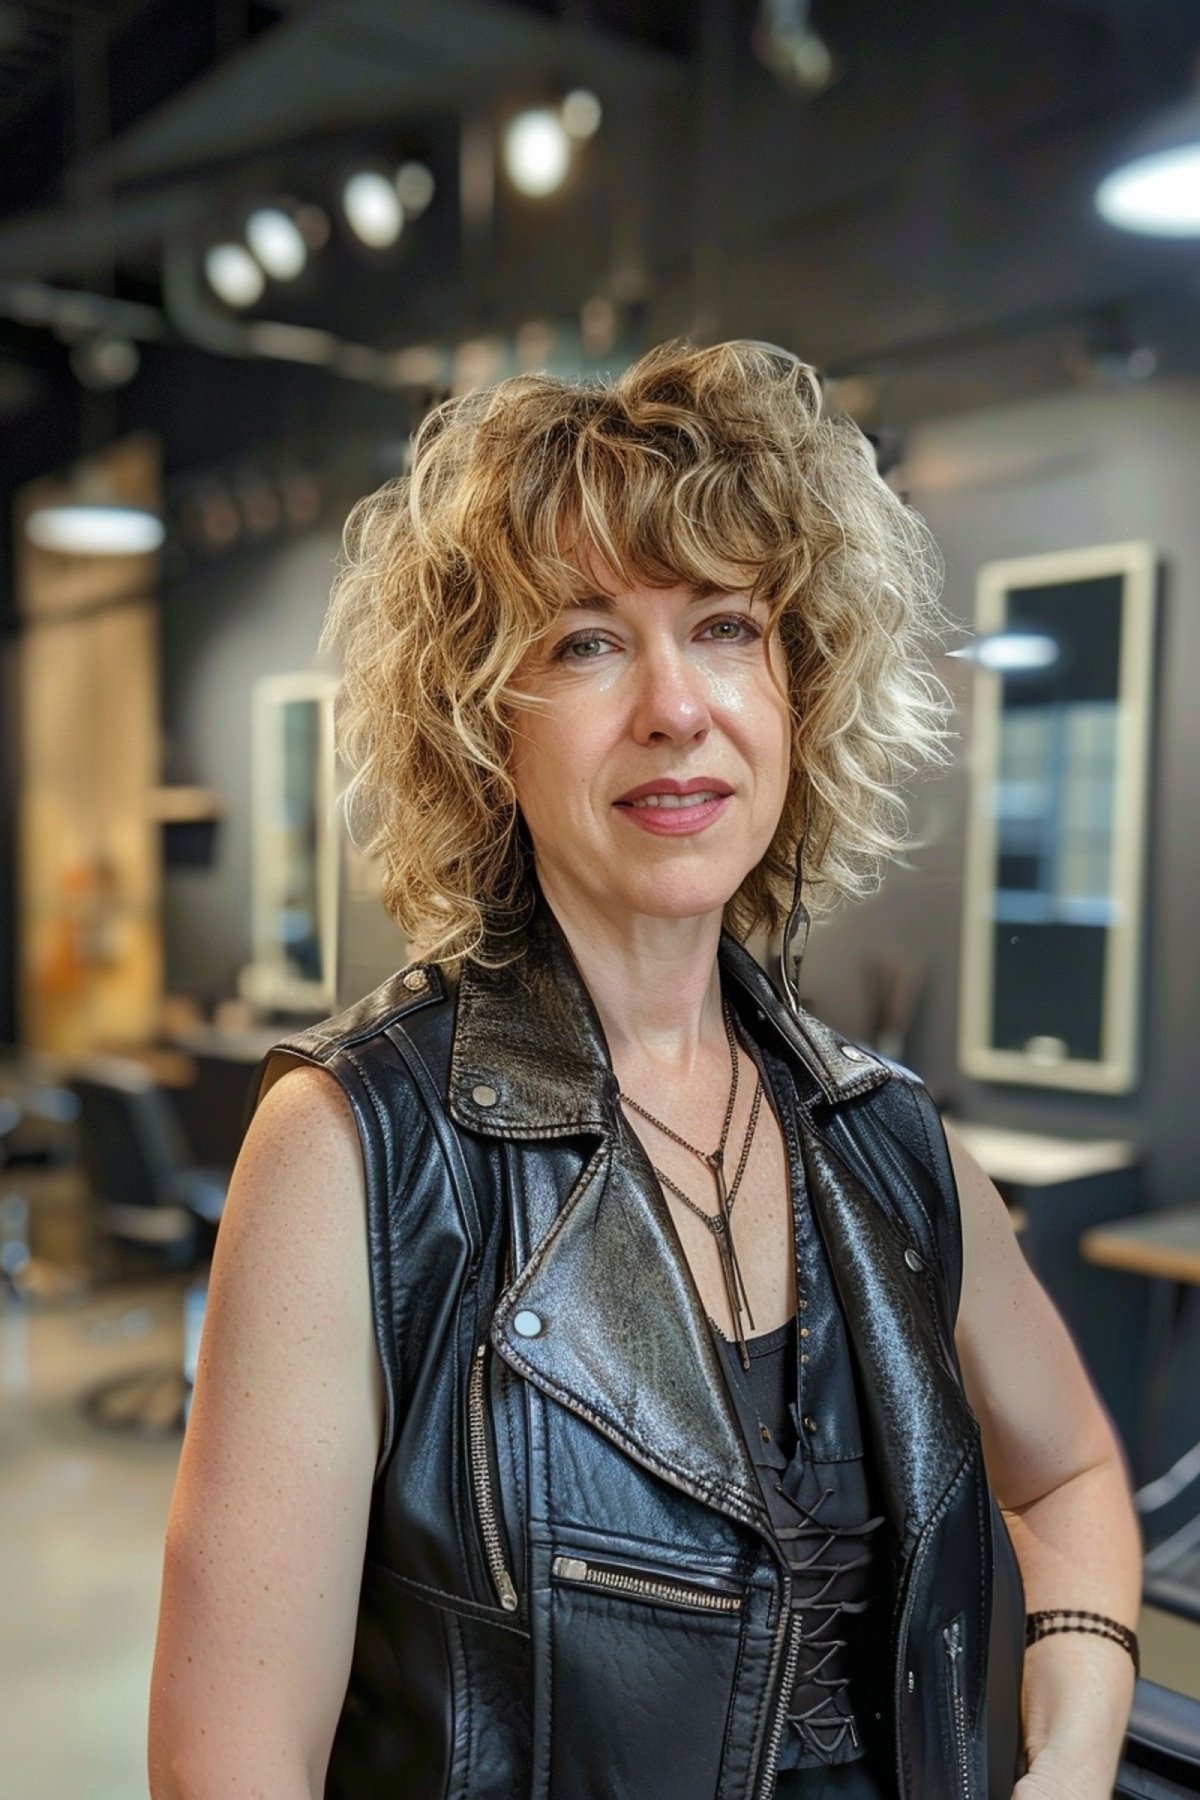 Woman with curly bob and bangs in rocker outfit at a salon